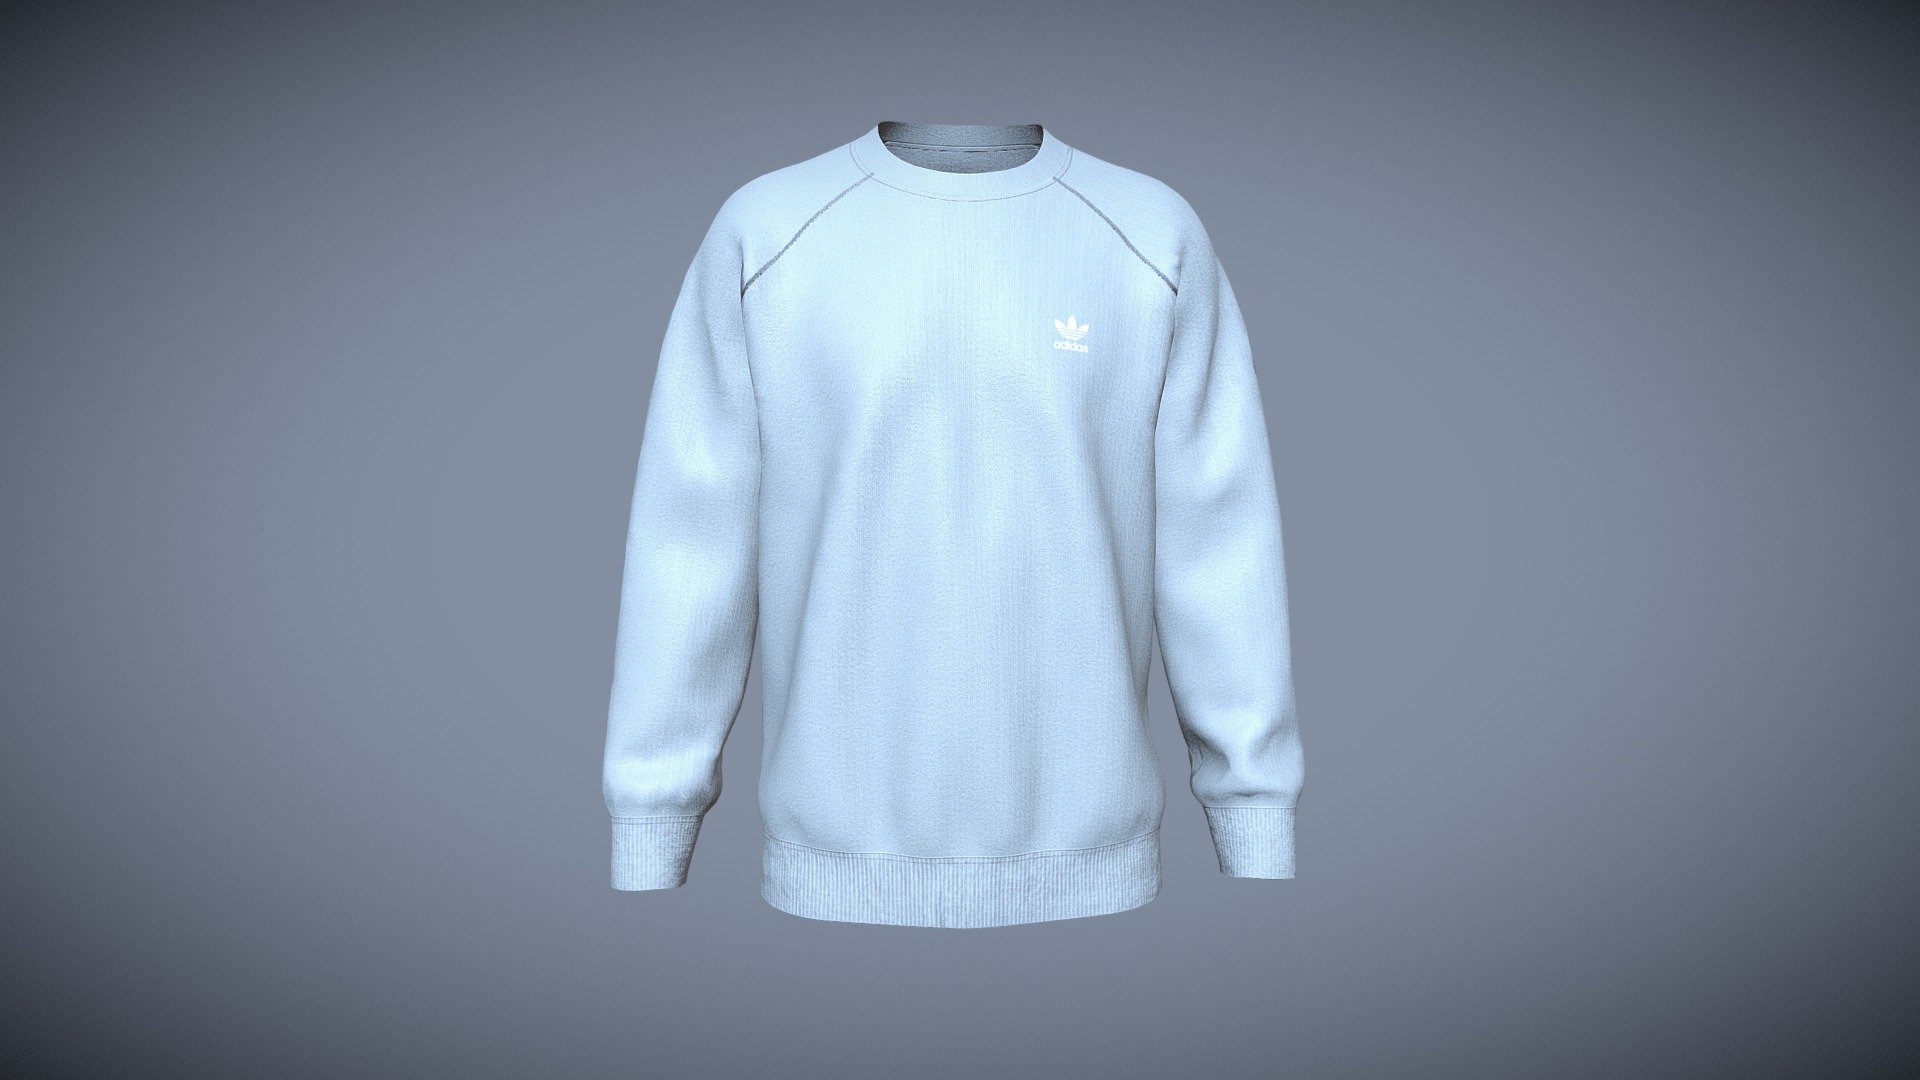 Adidas Trefoil Essentials Crewneck Sweatshirt

I am a Professional 3D Fashion/Apprel Designer. I have 7 years working experience about 3D Fashion. I am working with Clo3d, Marvelous Designer (MD), Daz3d, Blender, Cinema4d, Etc.

Features:
1.  2k UV Texture
2.  Triangle mesh
3.  Textures with Non-overlapping UV Map (2048x2048 Pixels)
4.  In additonal Textures folder have diffuse,displacement,metalness,normal,opacity,roughness maps.

Attachment Fils:
Exported Files (All are exported in DAZ Studio scale)
* OBJ
* FBX
* Marvelous Designer/Clo3d file (zprj)

Thanks 3d model